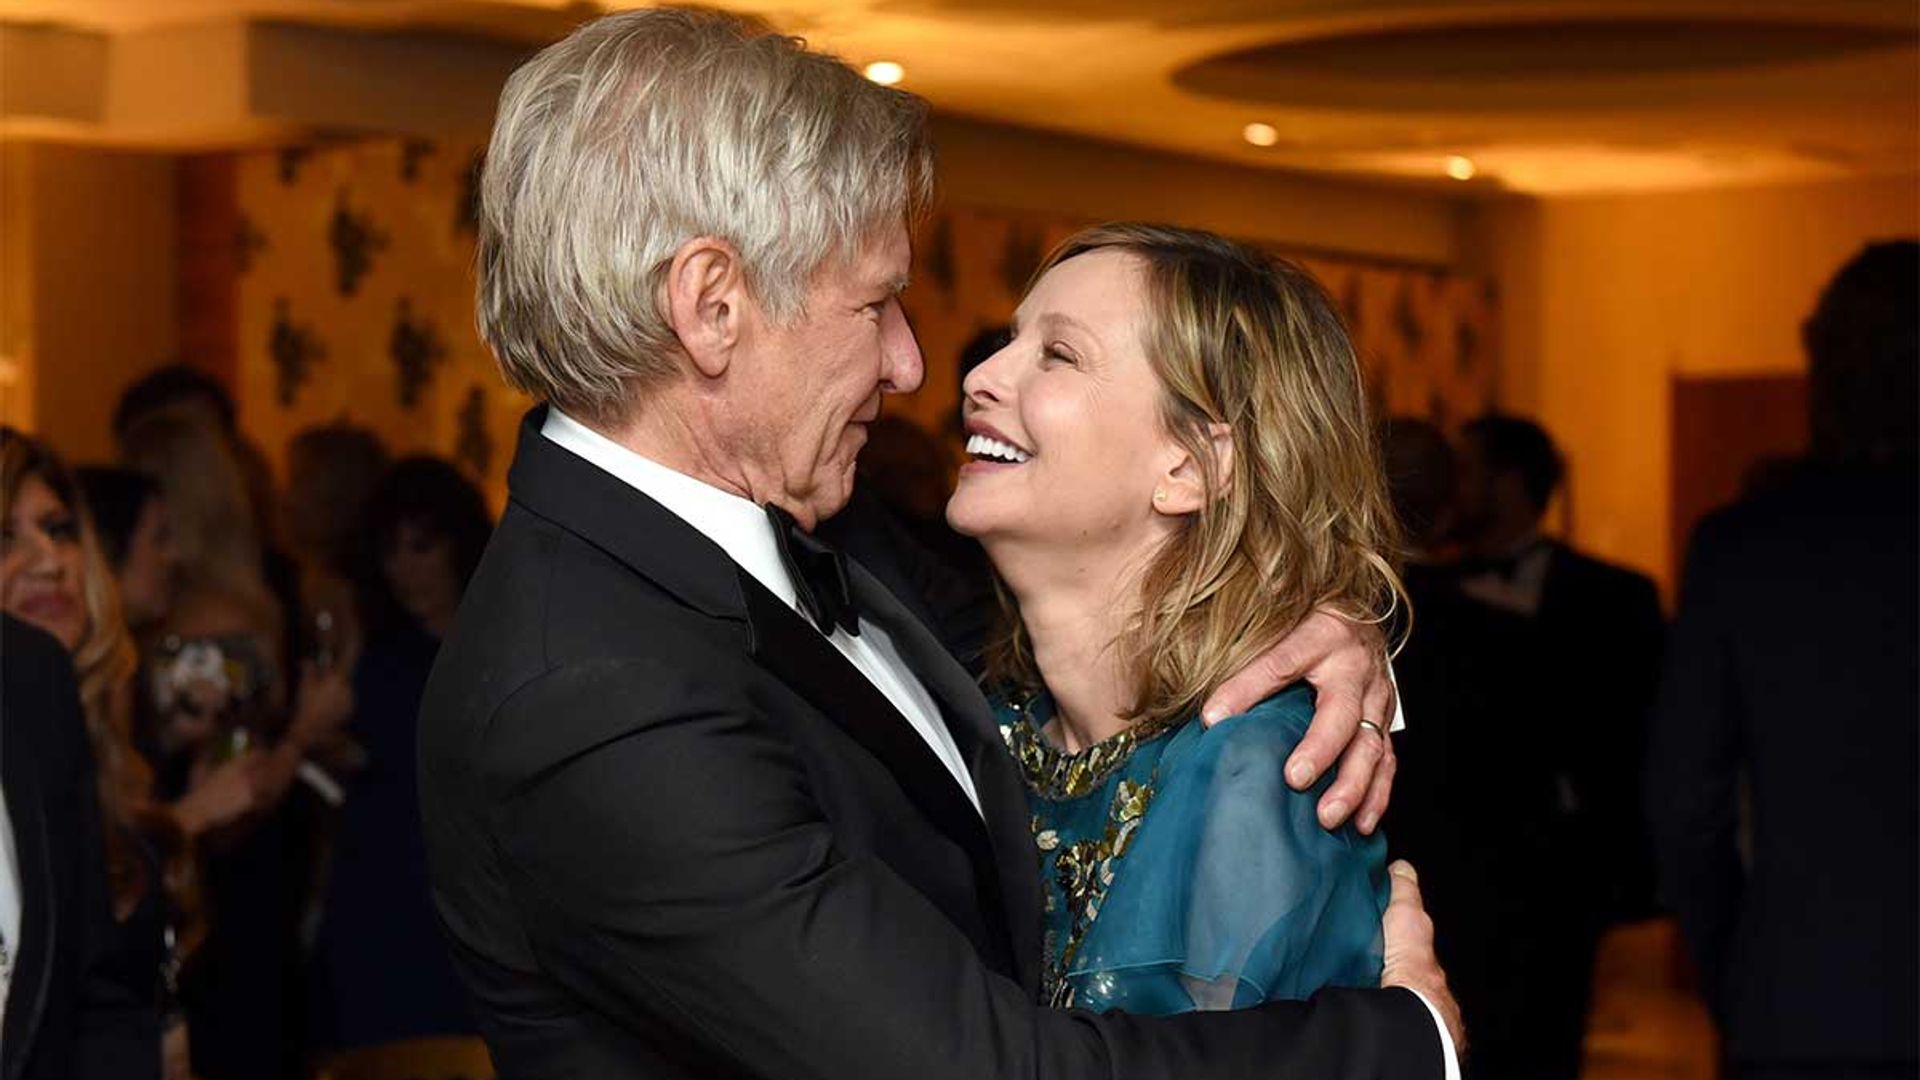 Star Wars Actor Harrison Ford Reveals Unusual Secret To Happy Marriage With Wife Calista